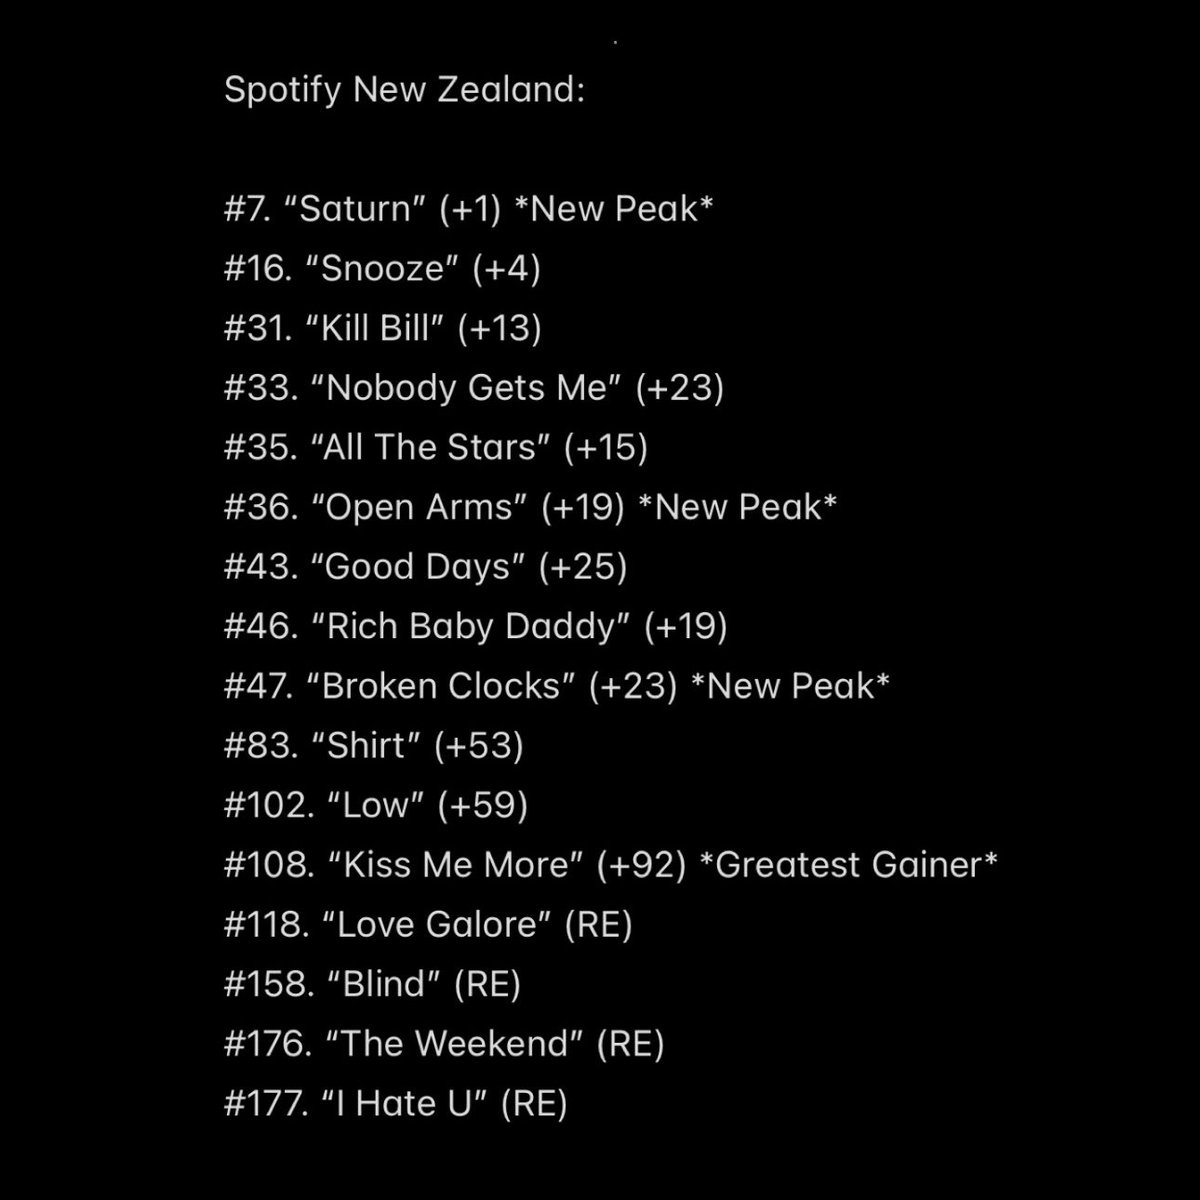 .@SZA charts 16 songs on today’s New Zealand Spotify chart (the most of any artist today), following the opening night of the SOS Tour in Auckland. — 3 songs reached a new peak position and “Kiss Me More” was the greatest gainer of all songs on today’s chart update.